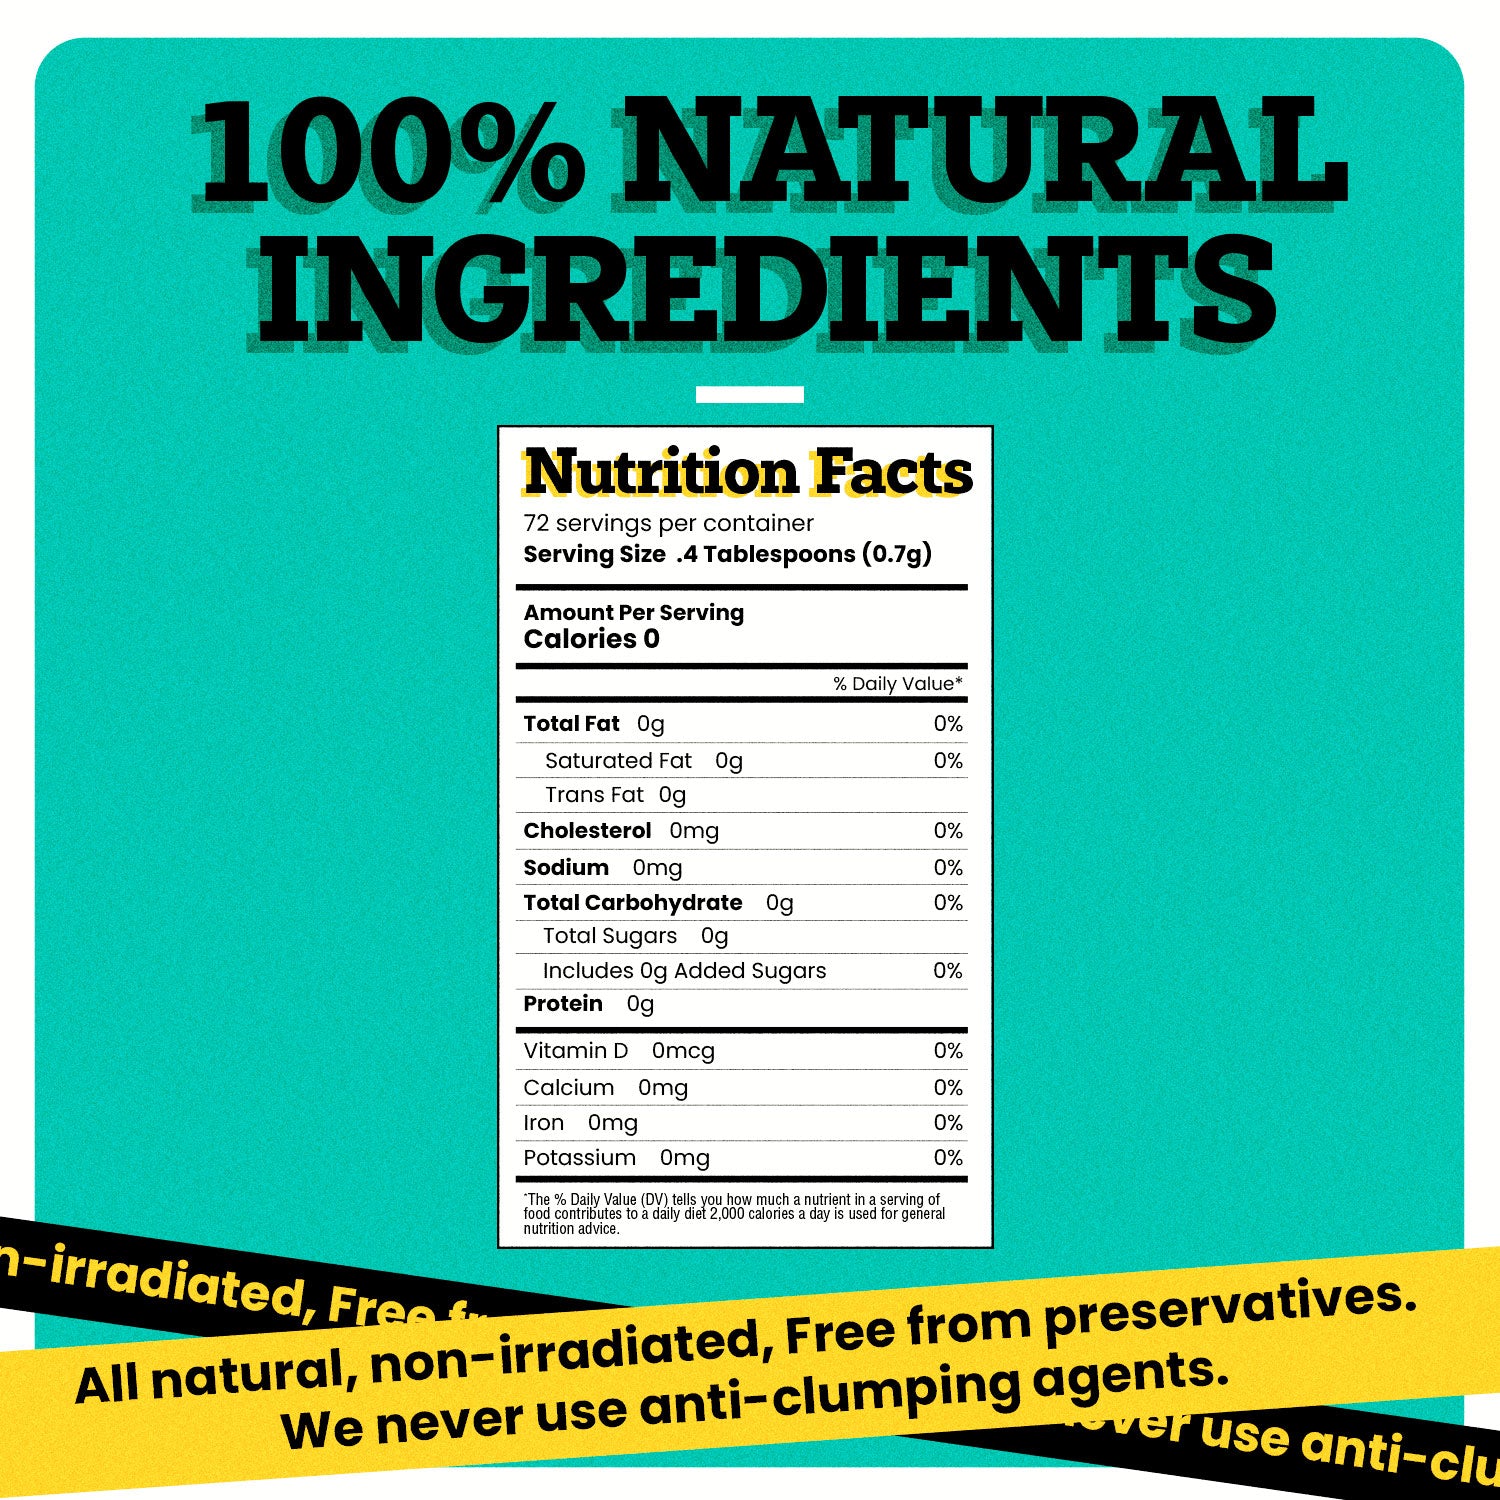 "“100% NATURAL INGREDIENTS” can be seen written on the top of the image in bold black font. Under this text, a Nutrition Facts receipt is present. At the bottom of the image, two bands black and yellow have “Free from all preservatives, fillers, stabilizers, and unnecessary thickeners. Necessary” written on them.  "